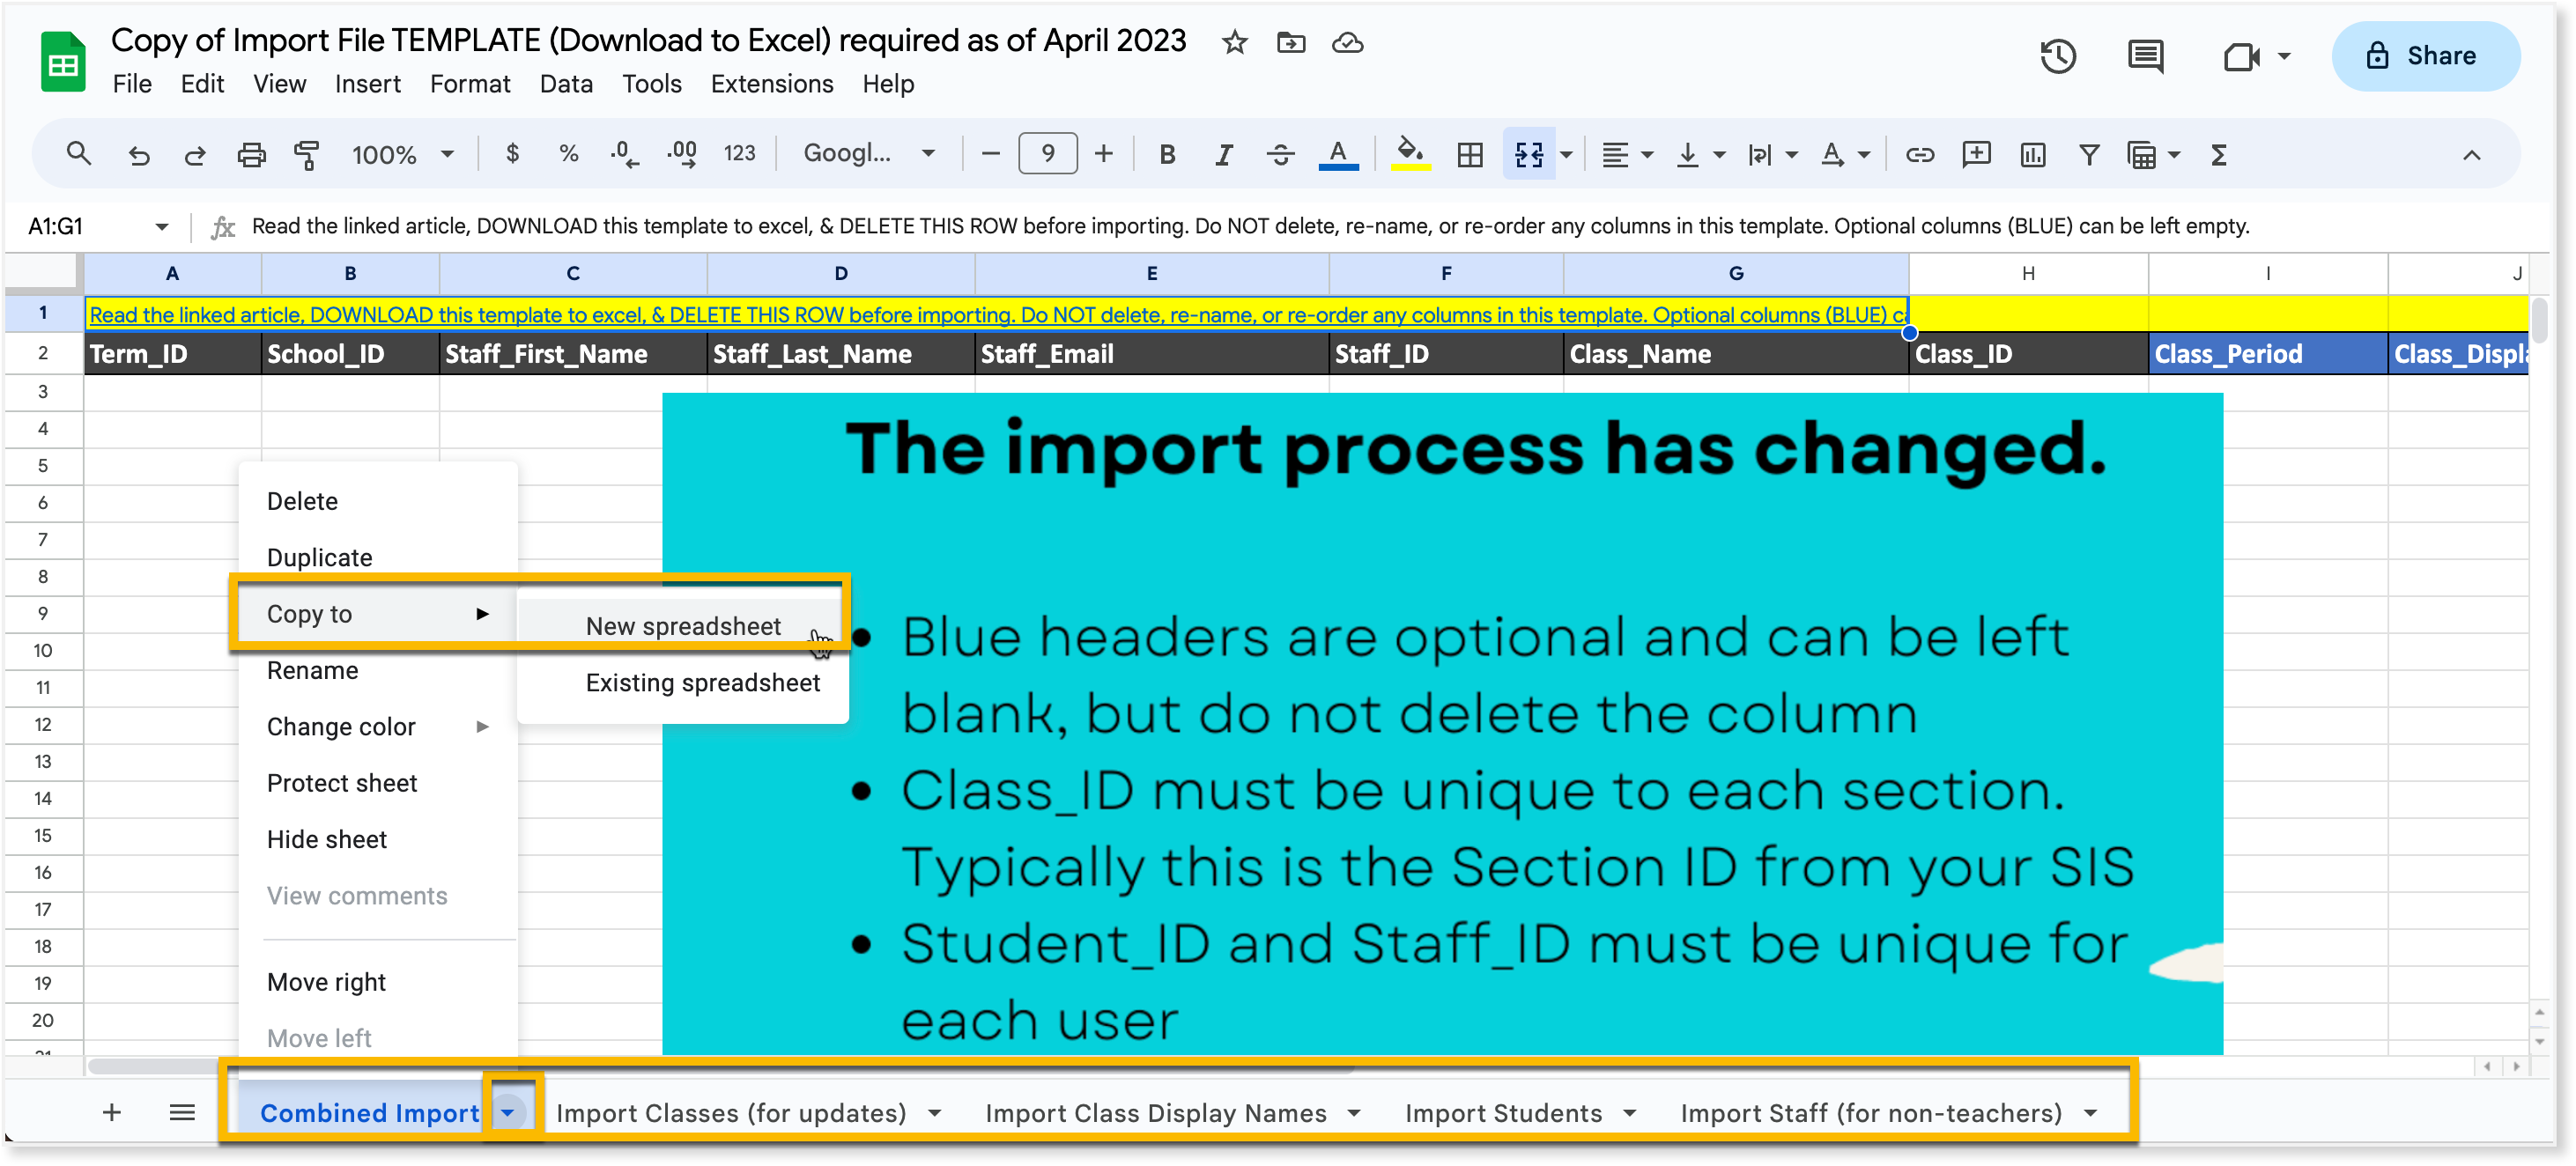 Copy of Import File Template.png